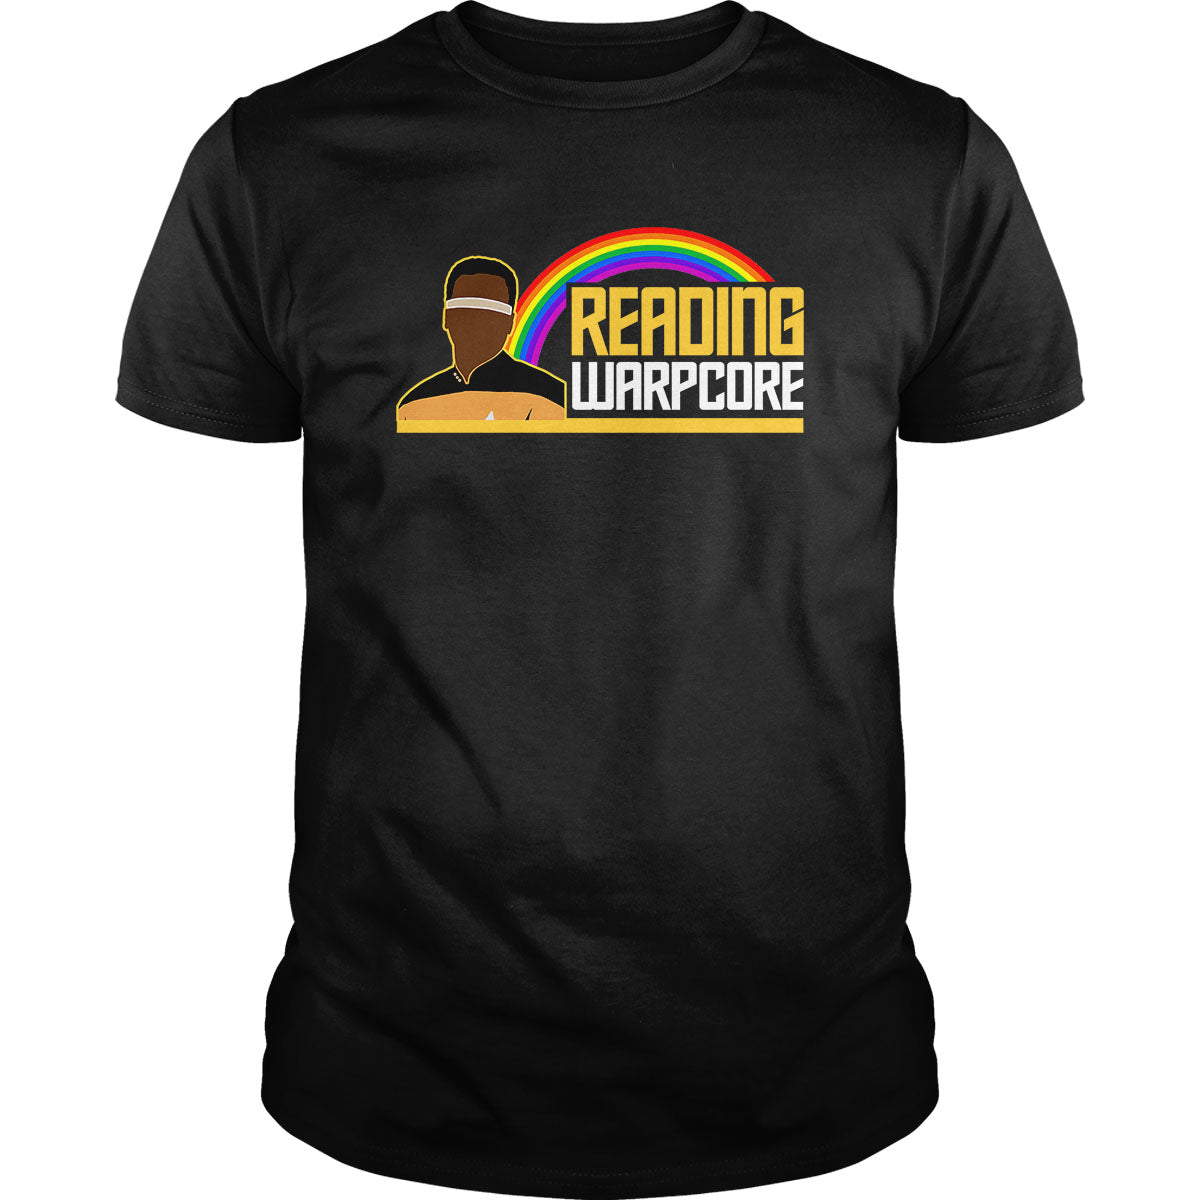 Reading Warpcore - BustedTees.com